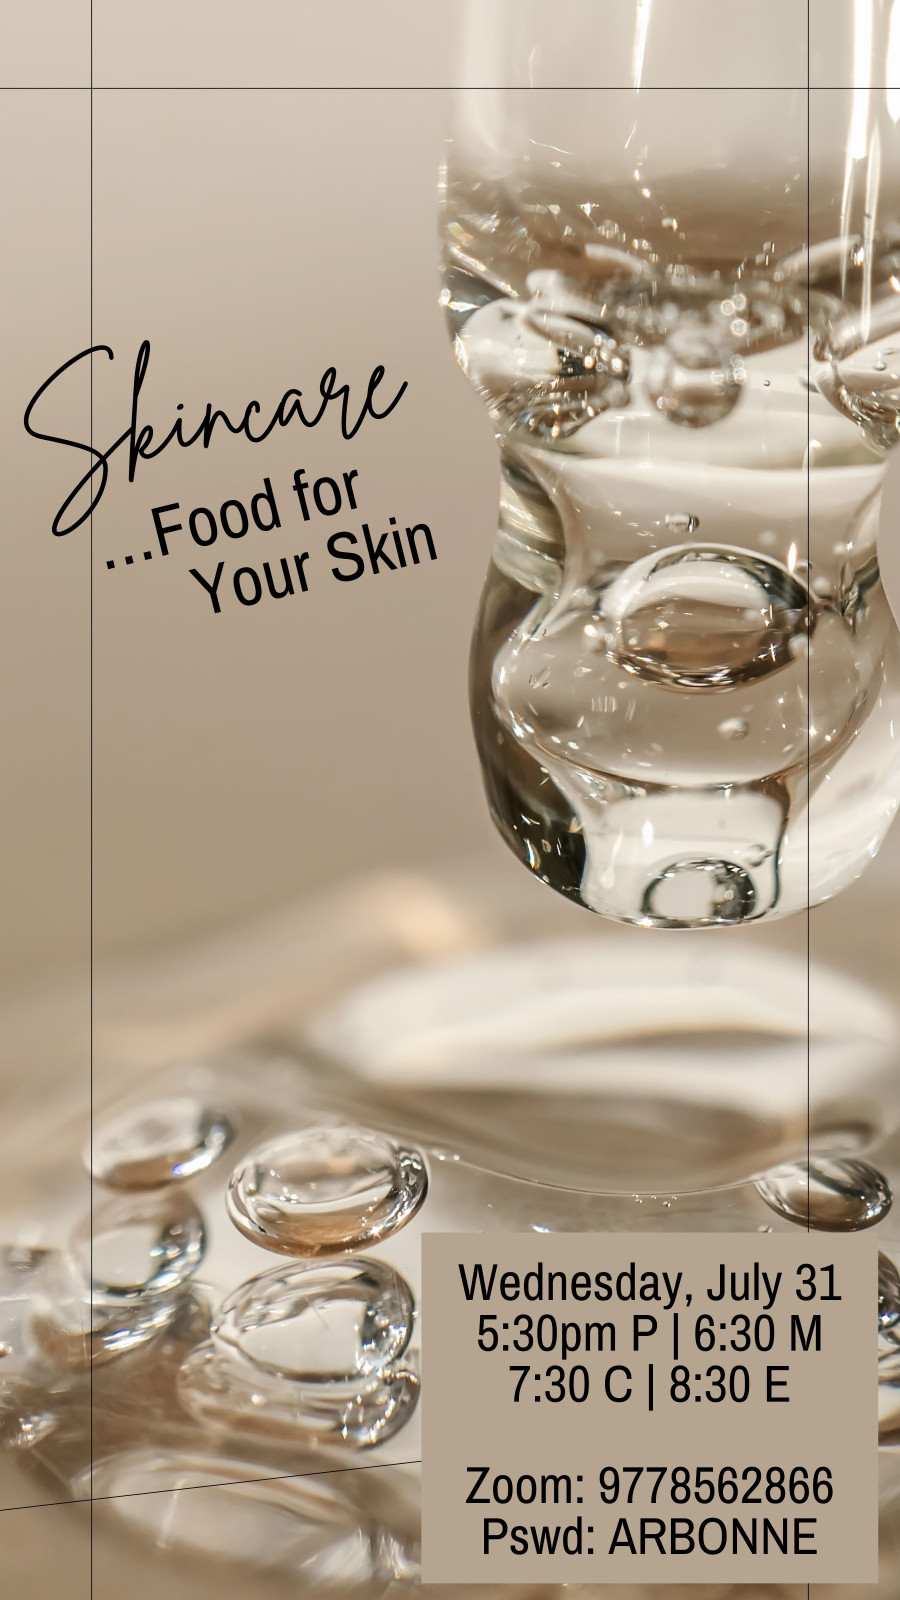 Skincare - Food for your skin - July 31